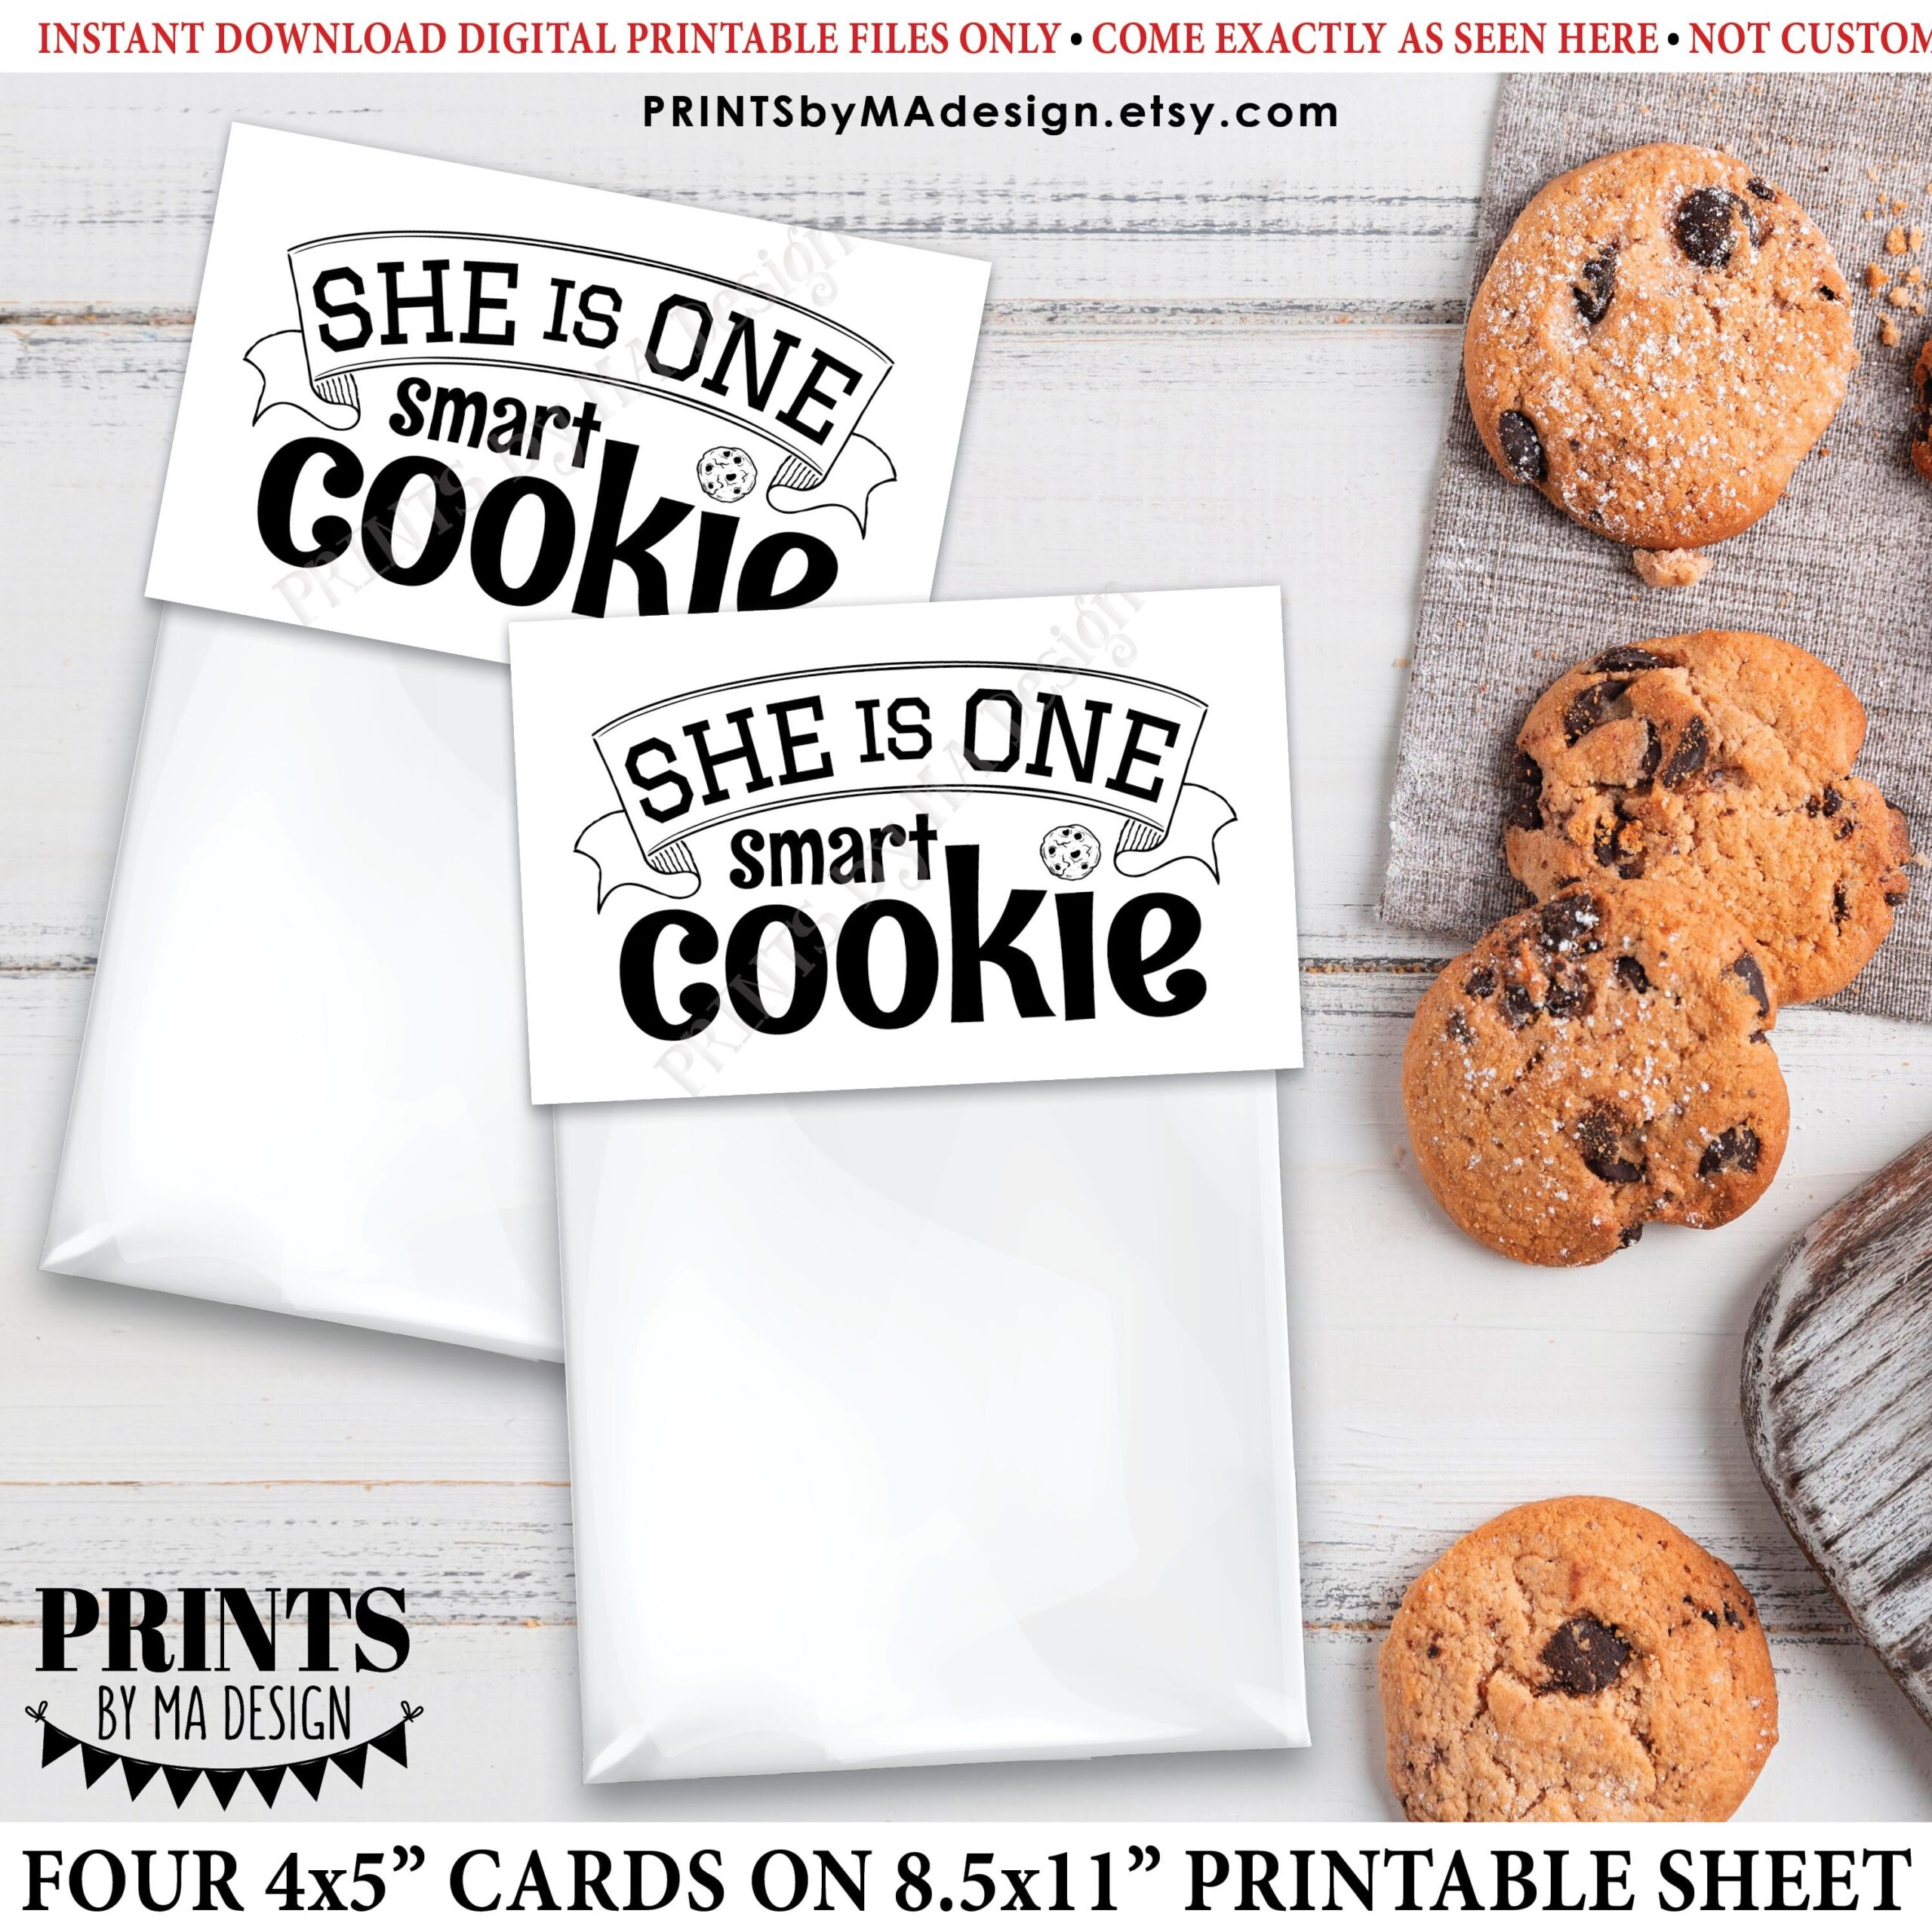 She'S One Smart Cookie Free Printable